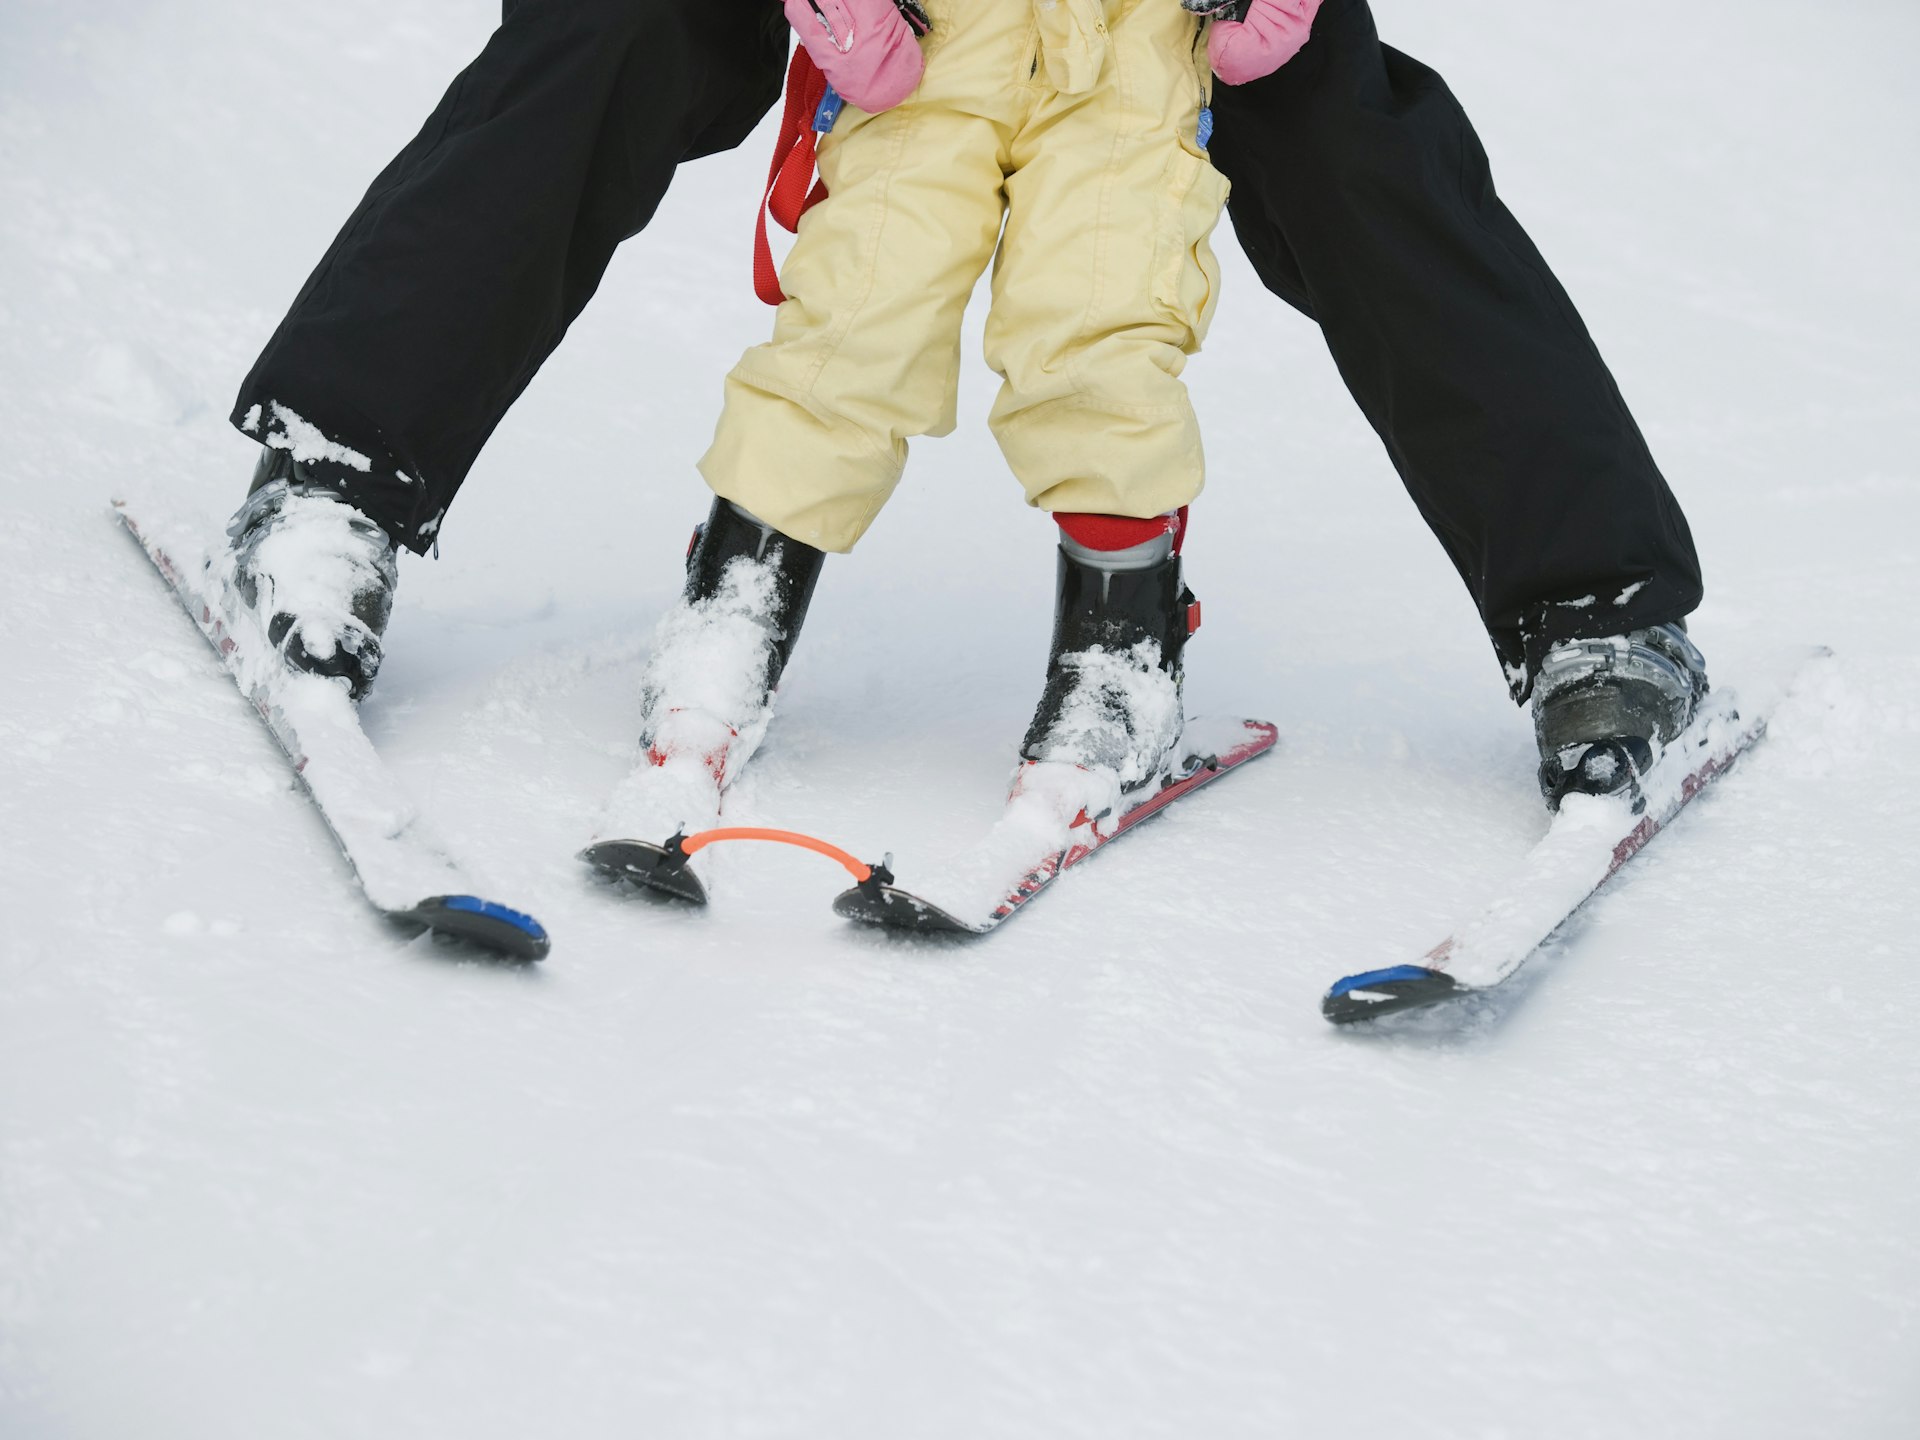 Parent and child skiing